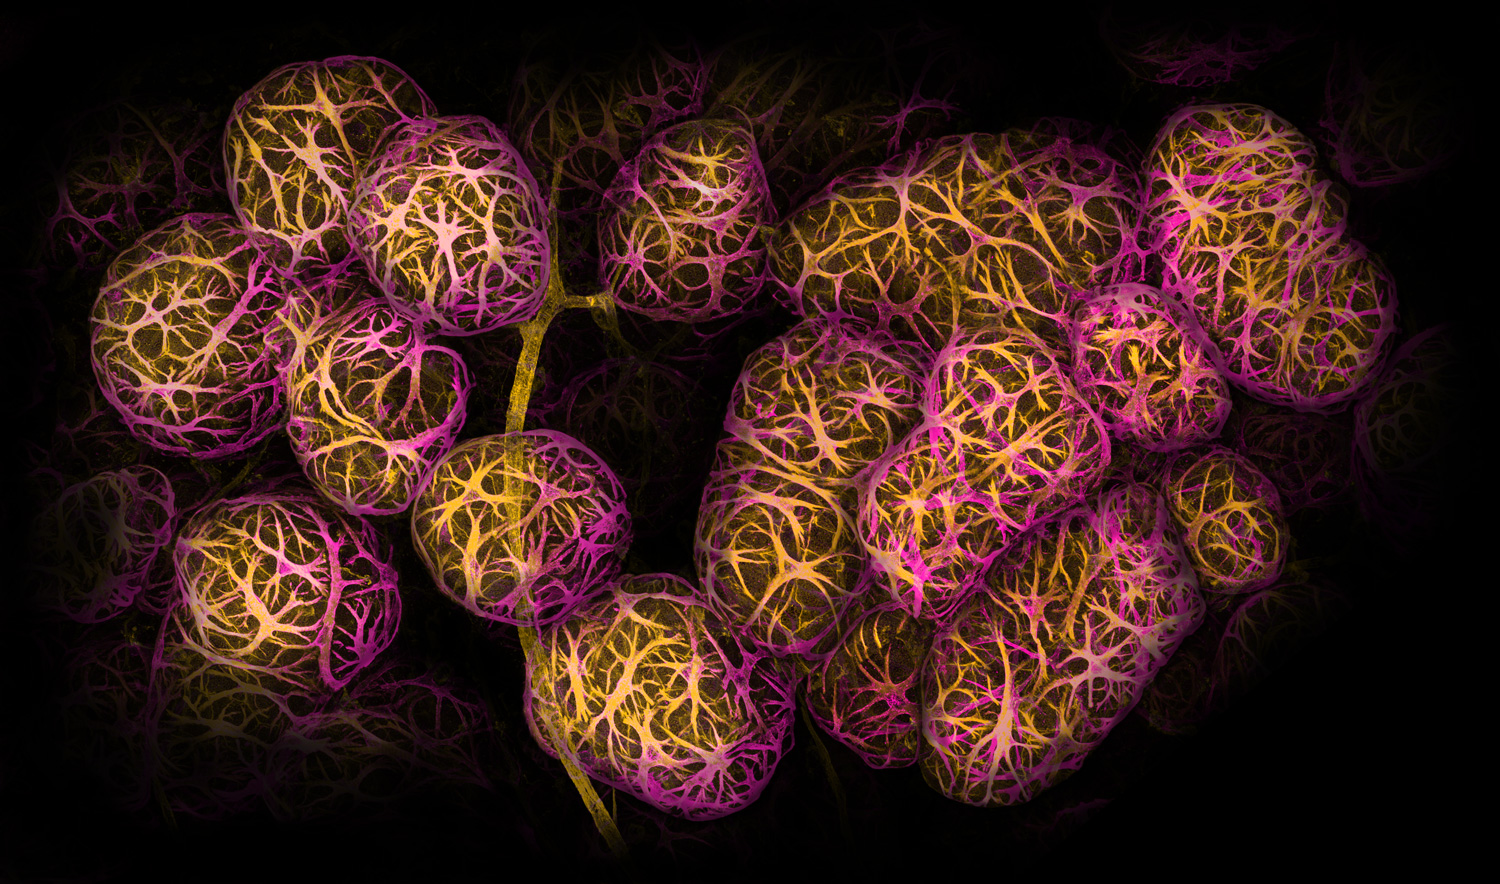 magenta and yellow ball-shaped structures grouped around a yellow blood vessel on a black background